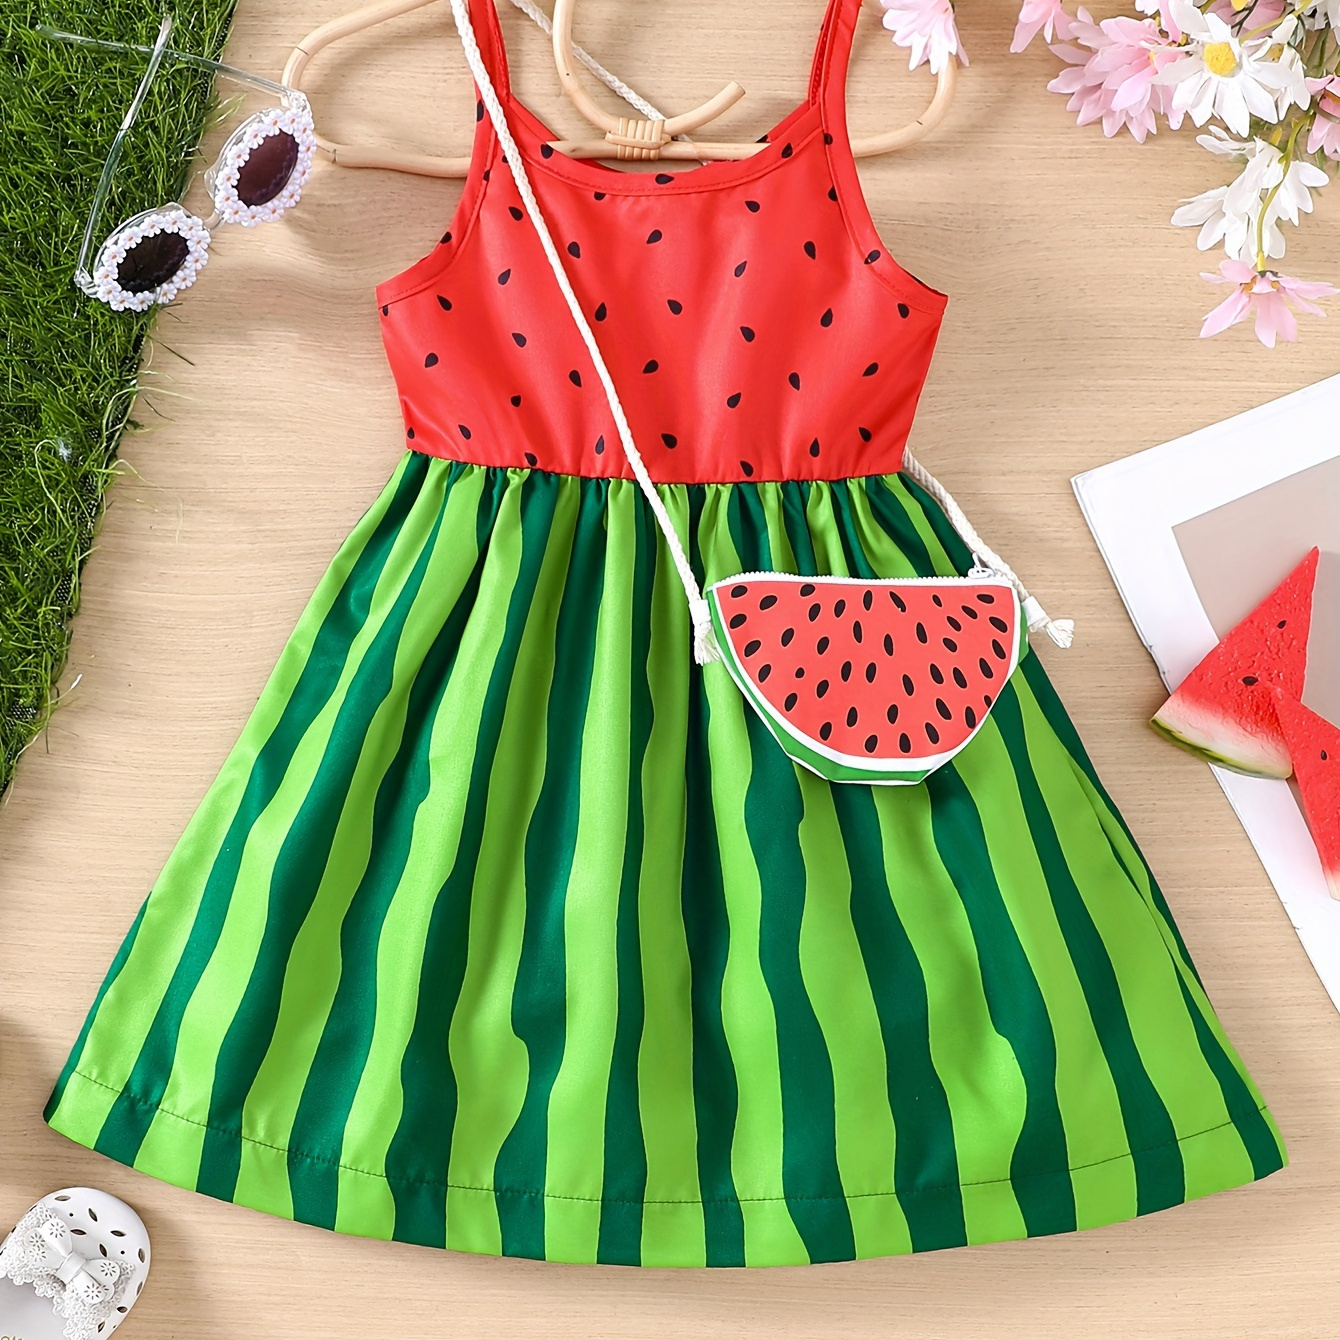 

Sweet Girls Splicing Watermelon Themed Style Cami Dress With Bag For Summer Party Gift